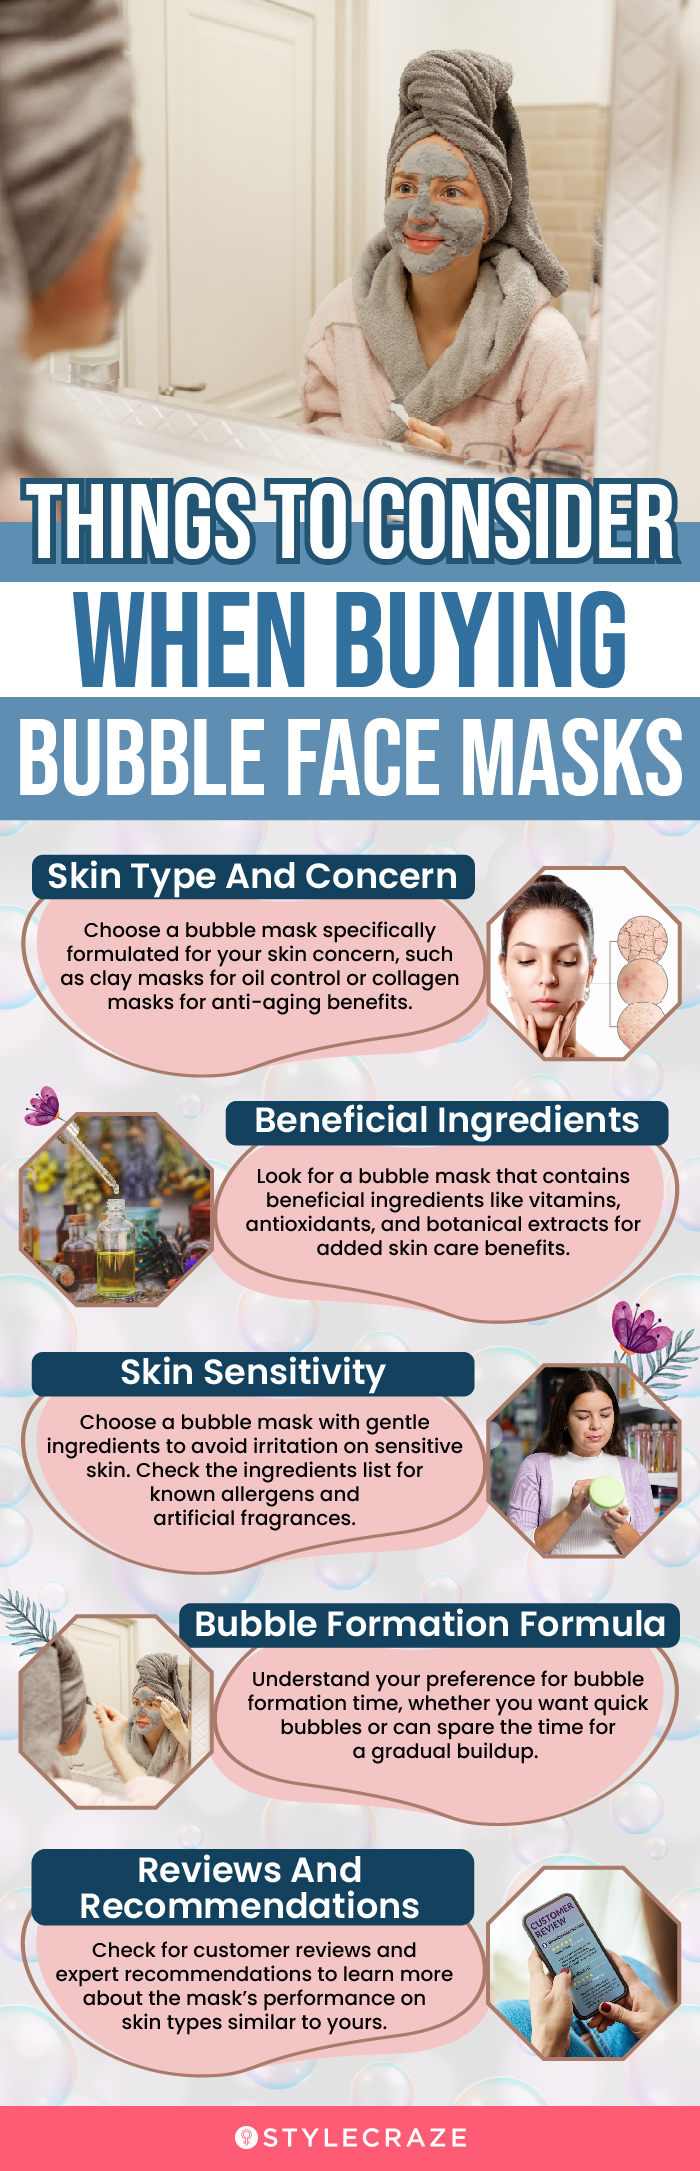 Things To Consider When Buying Bubble Face Masks (infographic)